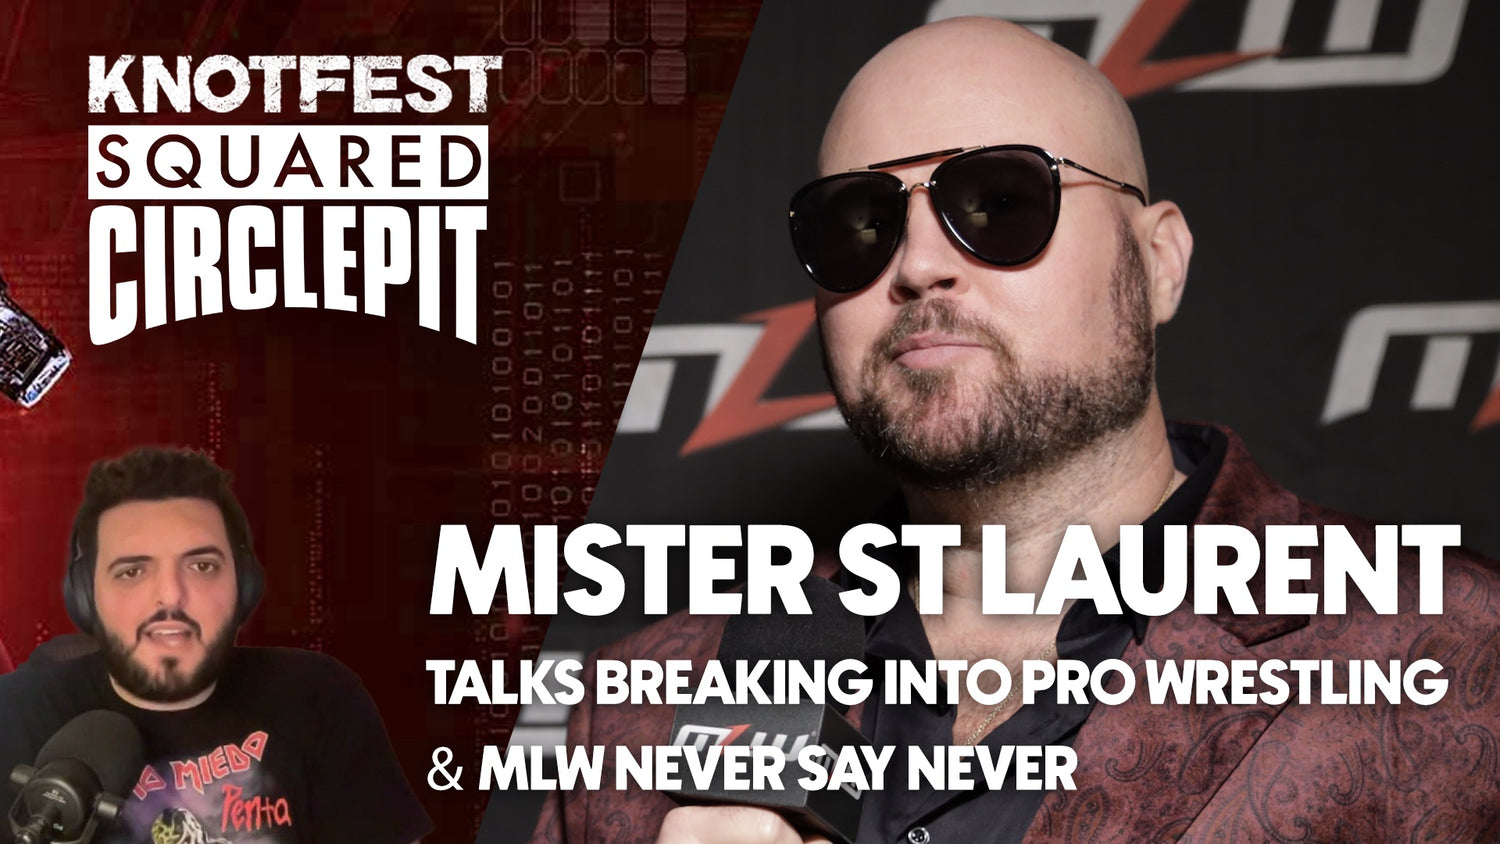 Squared Circle Pit - MLW's Mister St. Laurent On How He Broke Into Pro Wrestling